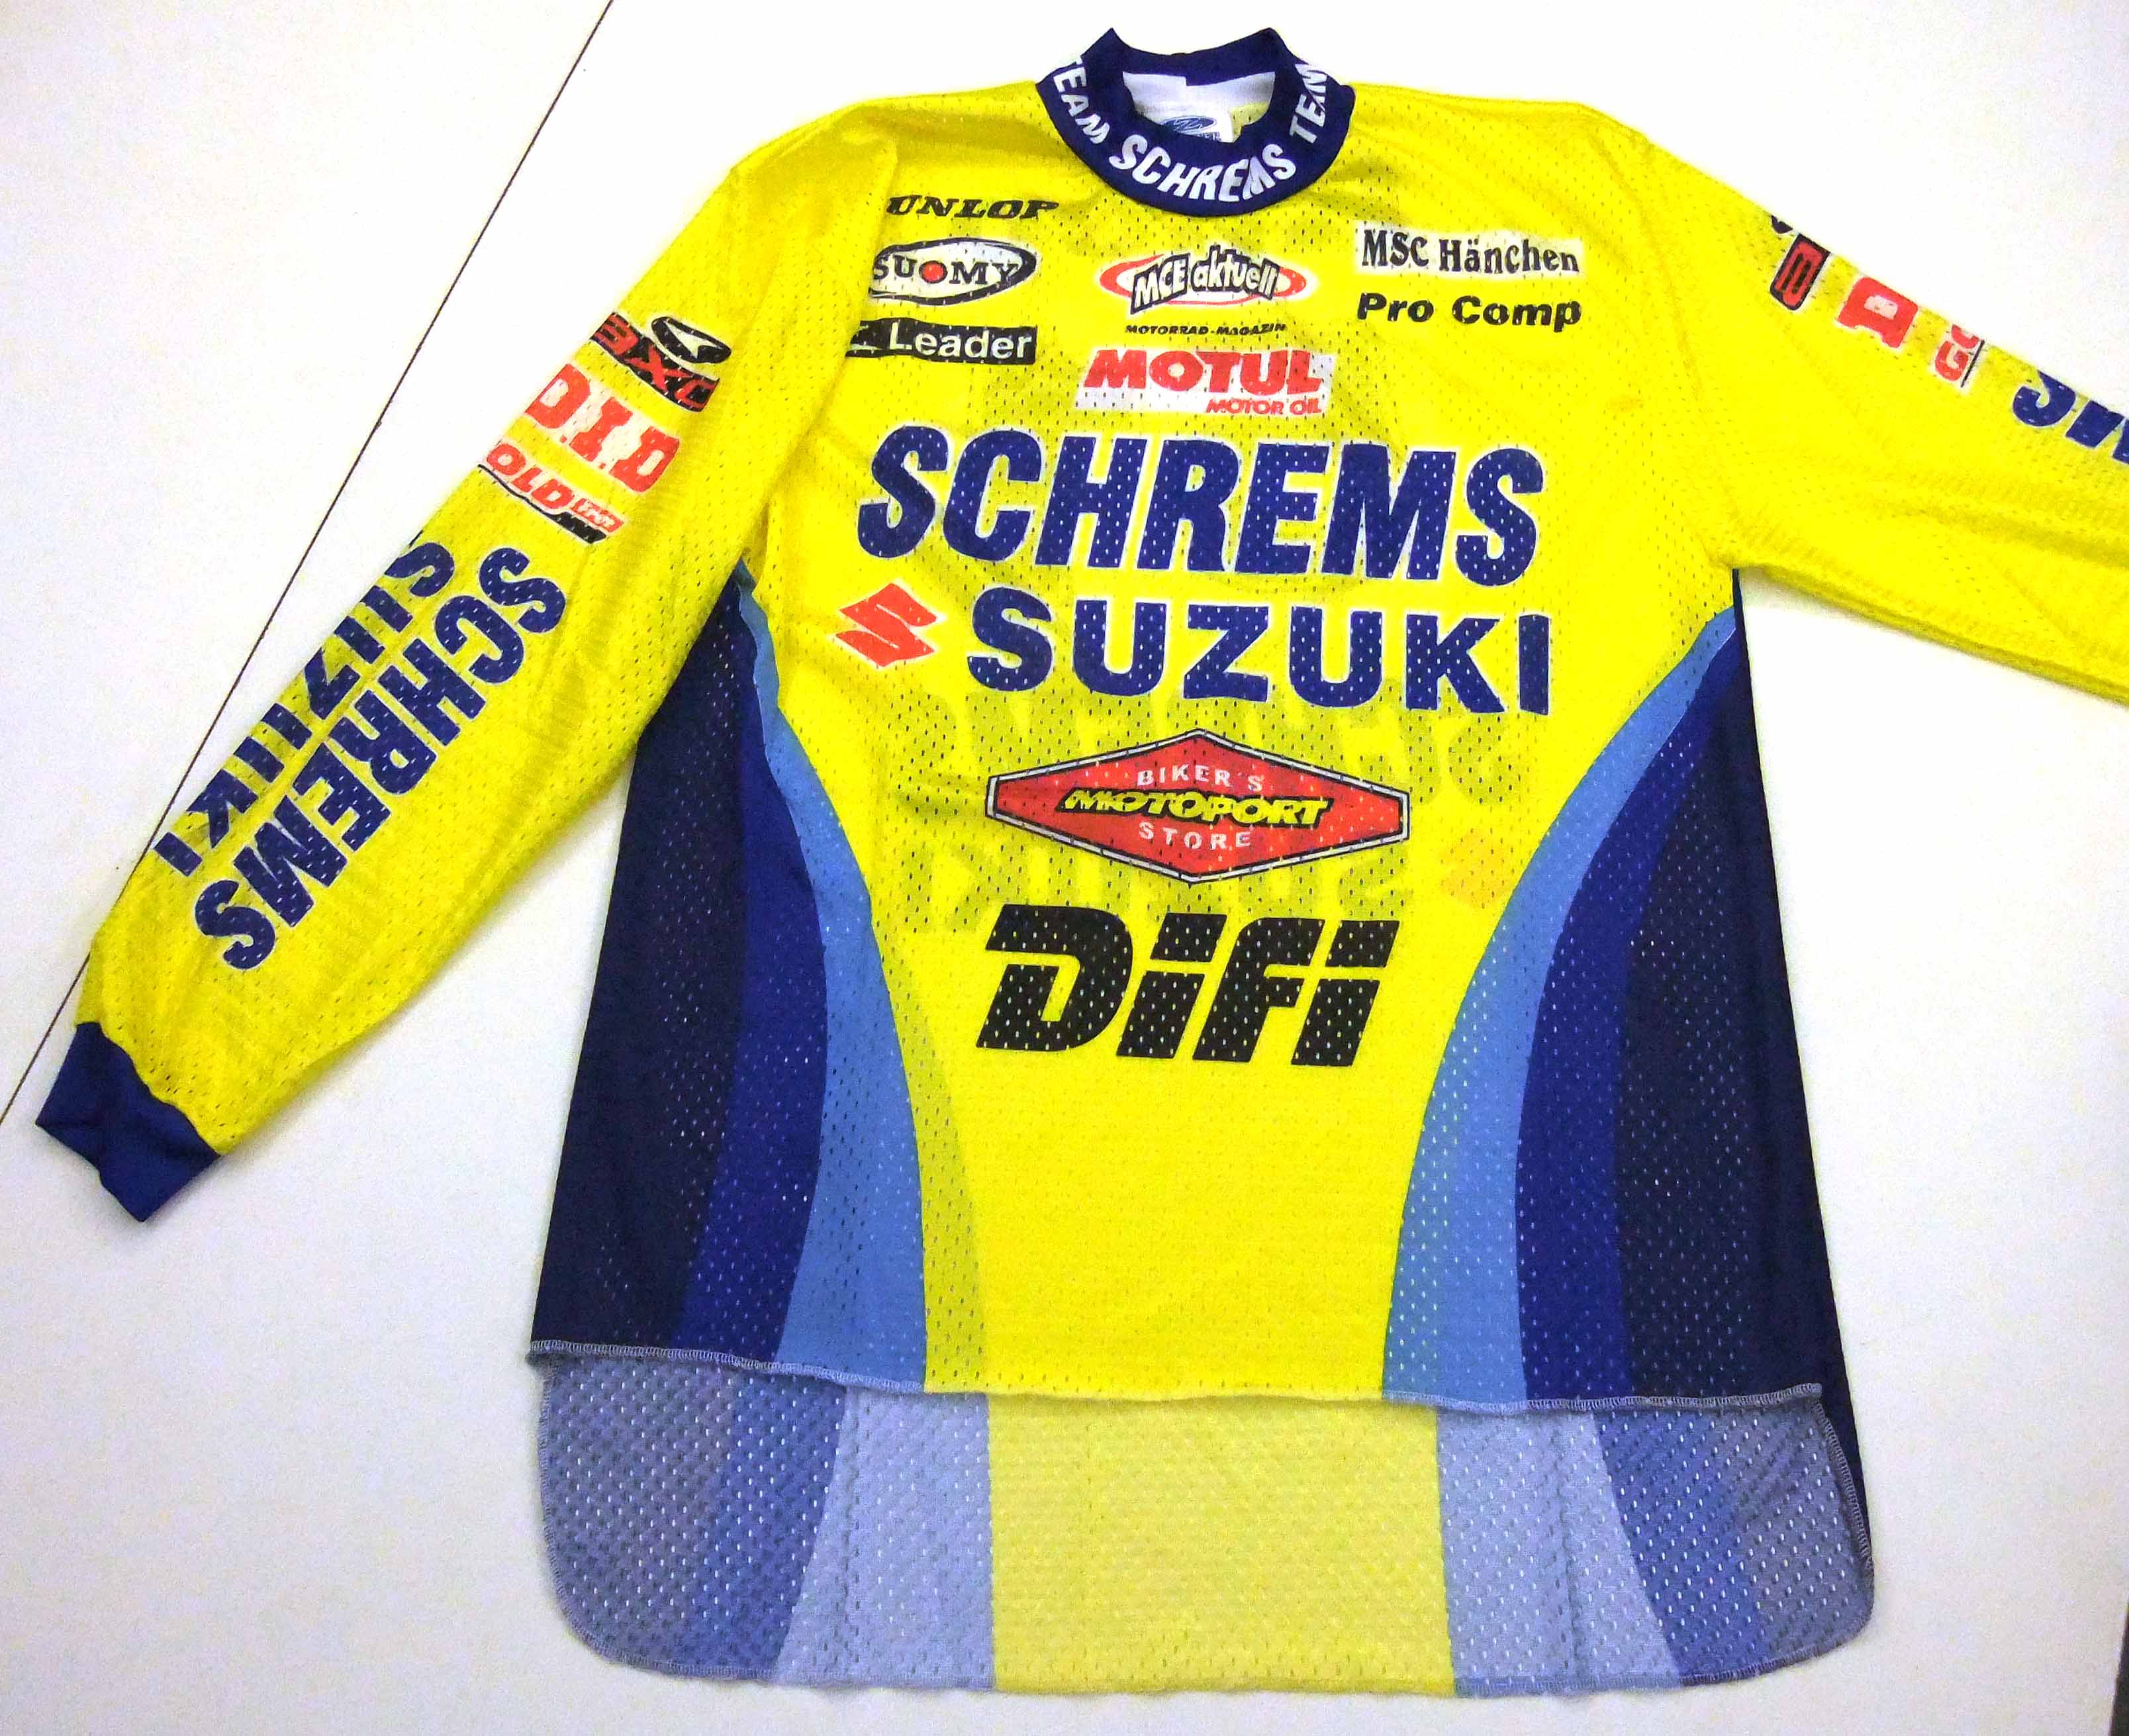 SCHREMS TEAM JERSEY OLD SCHOOL PERFORATED 2001 XL KNOP